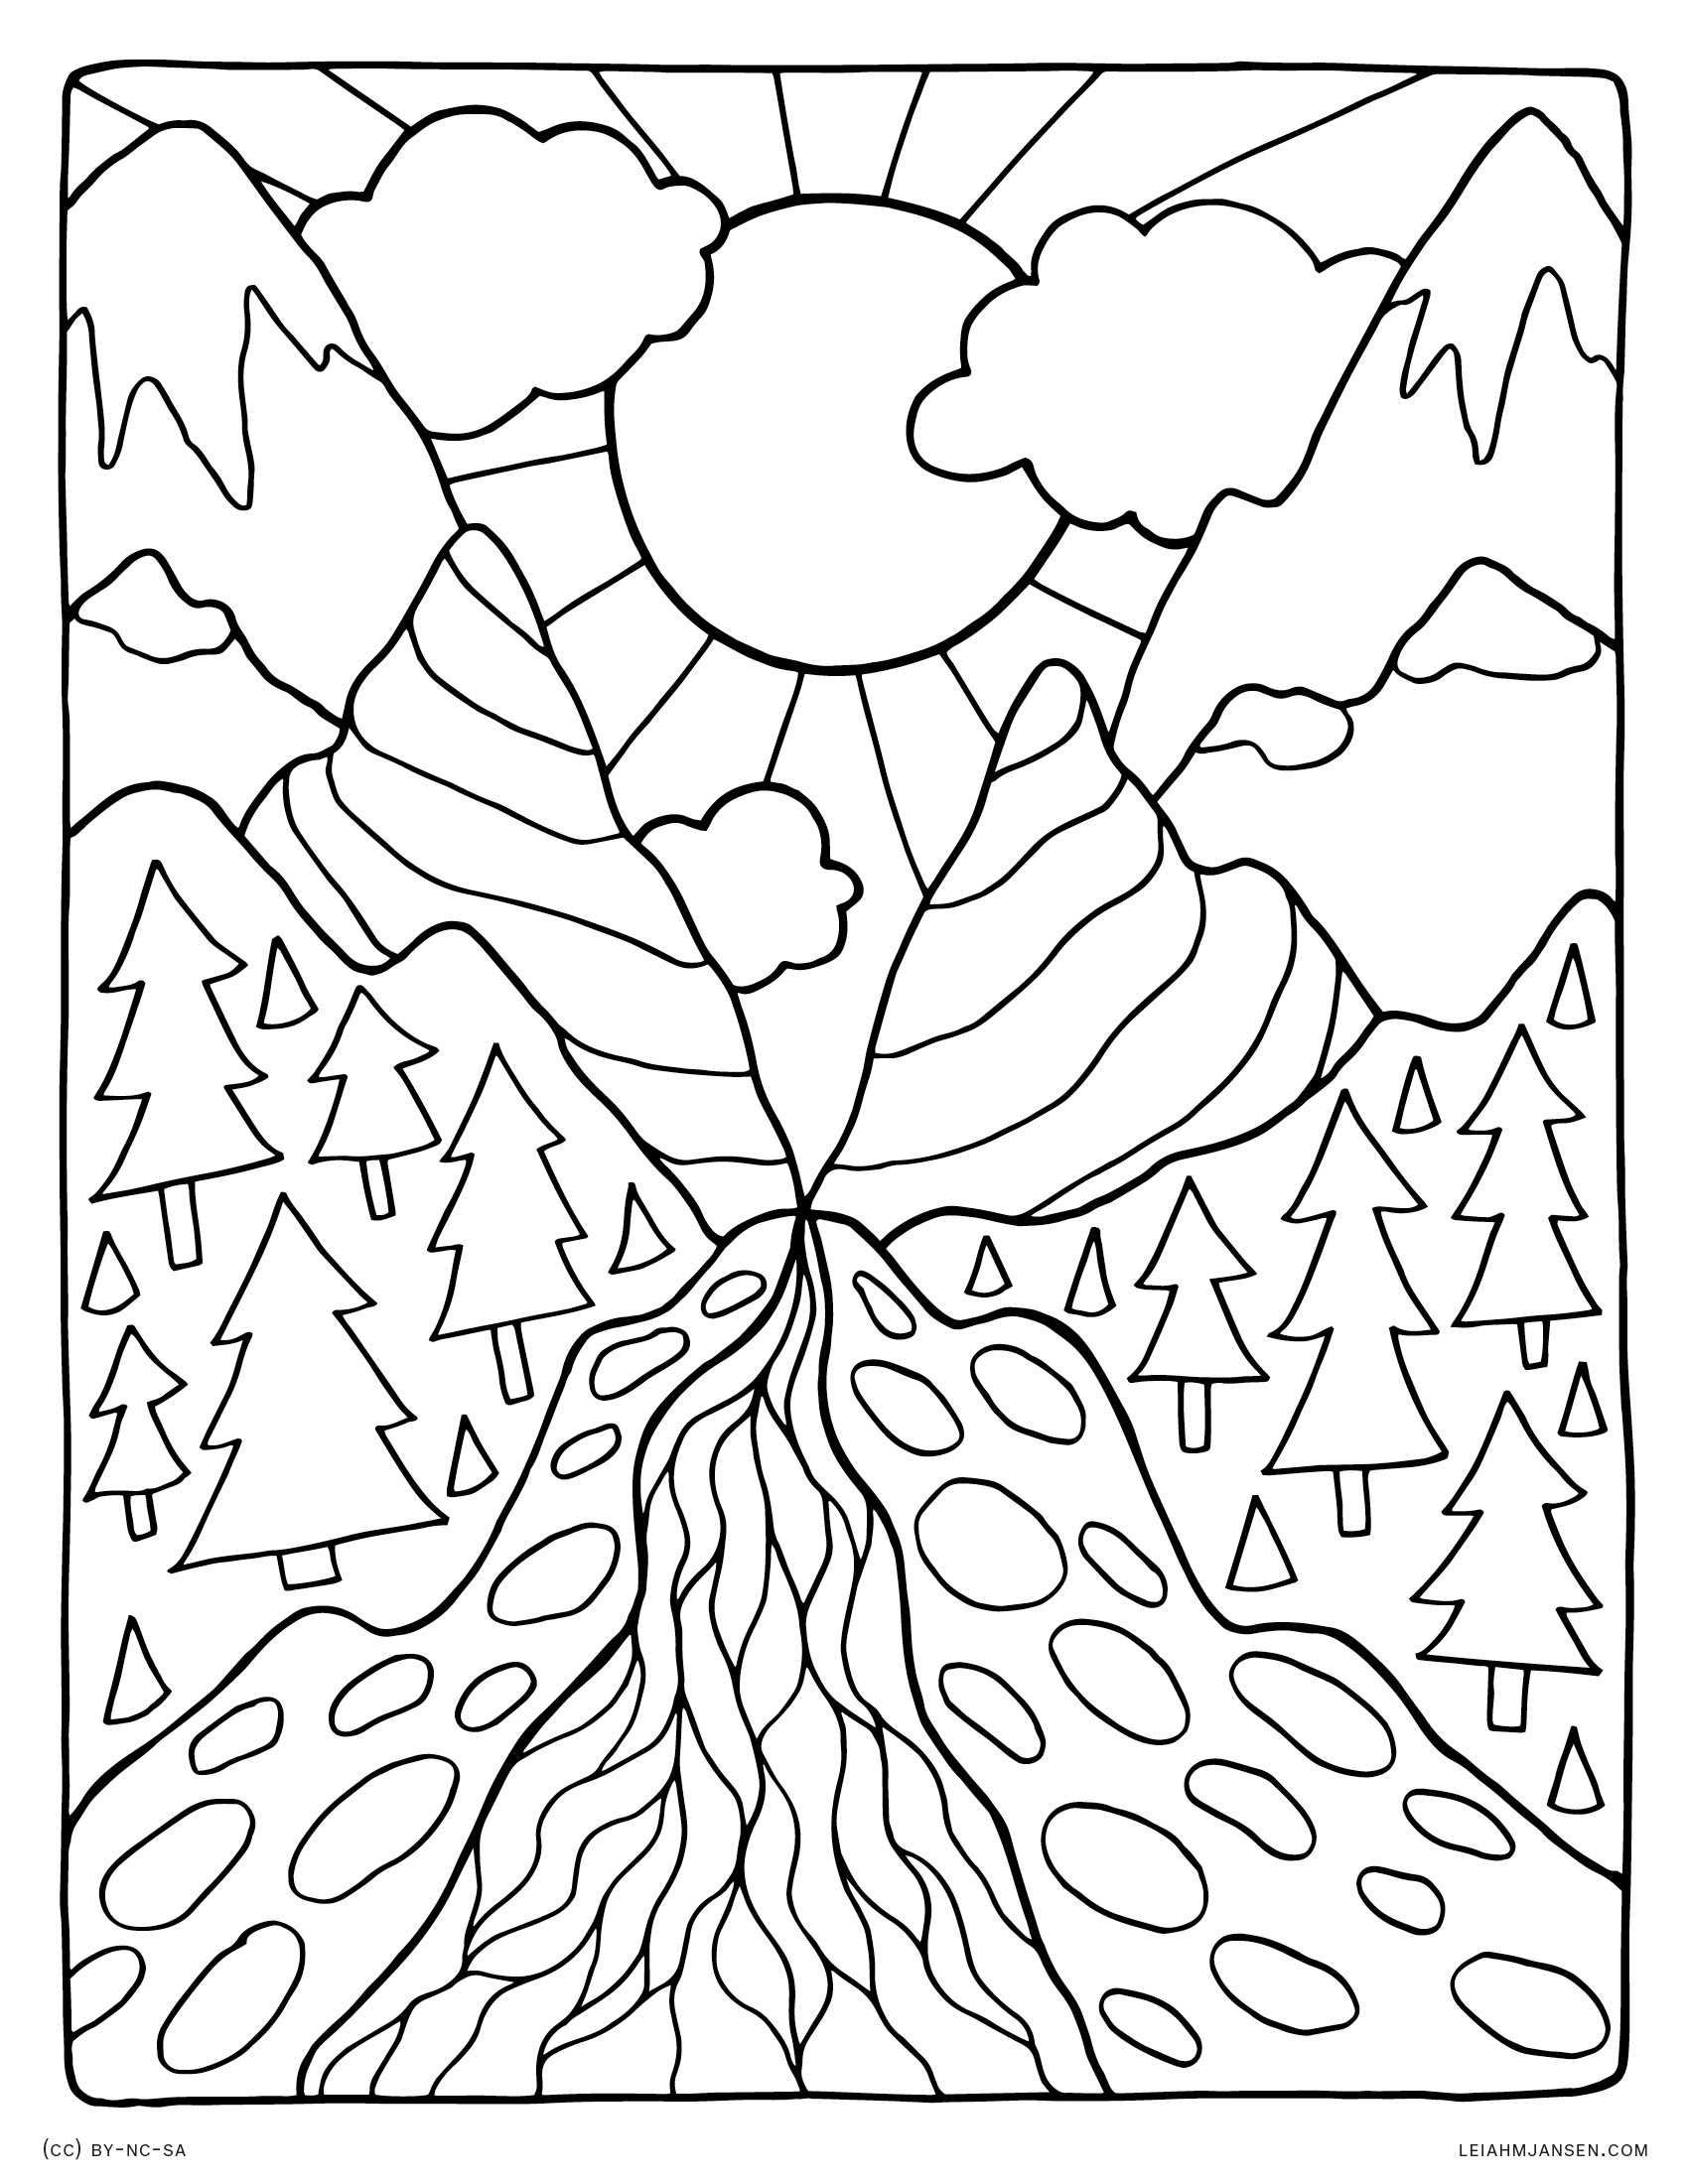 Nature Coloring Pages at Free printable colorings